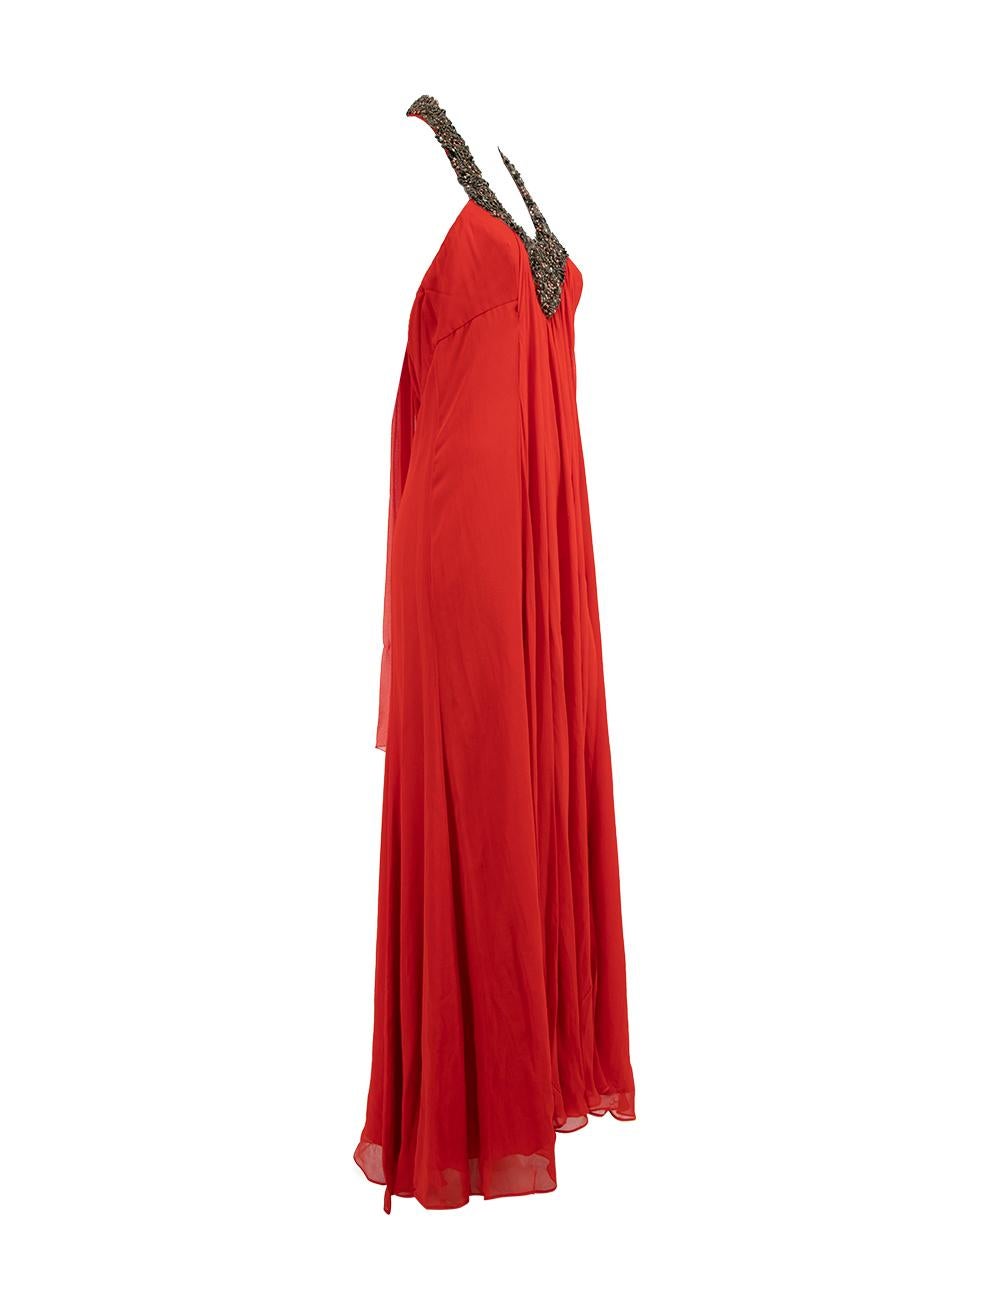 CONDITION is Very good. Minimal wear to dress is evident. There are a few scratches and loose thread/sequins on this used Amanda Wakeley designer resale item. Details Red Silk Evening gown Maxi length Sleeveless Halter neck Tie neck Sequins and